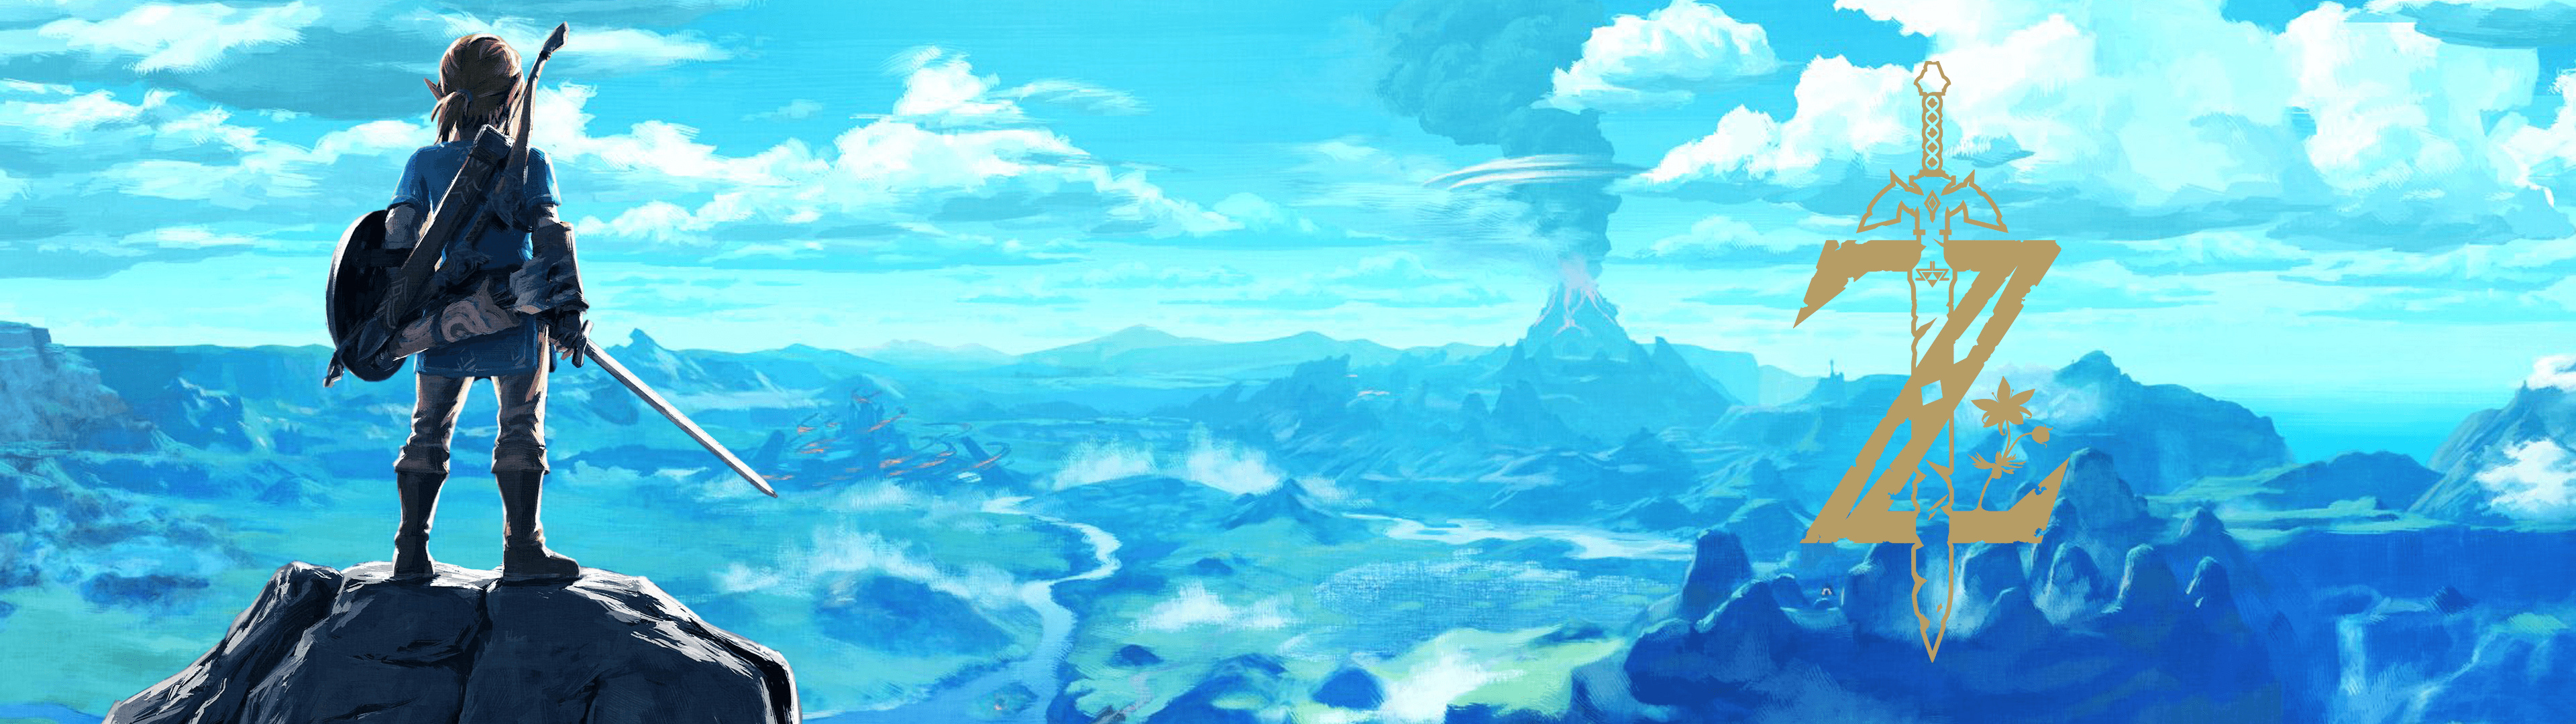 Breath of the Wild wallpapers, High resolution, 3840x1080 Dual Screen Desktop